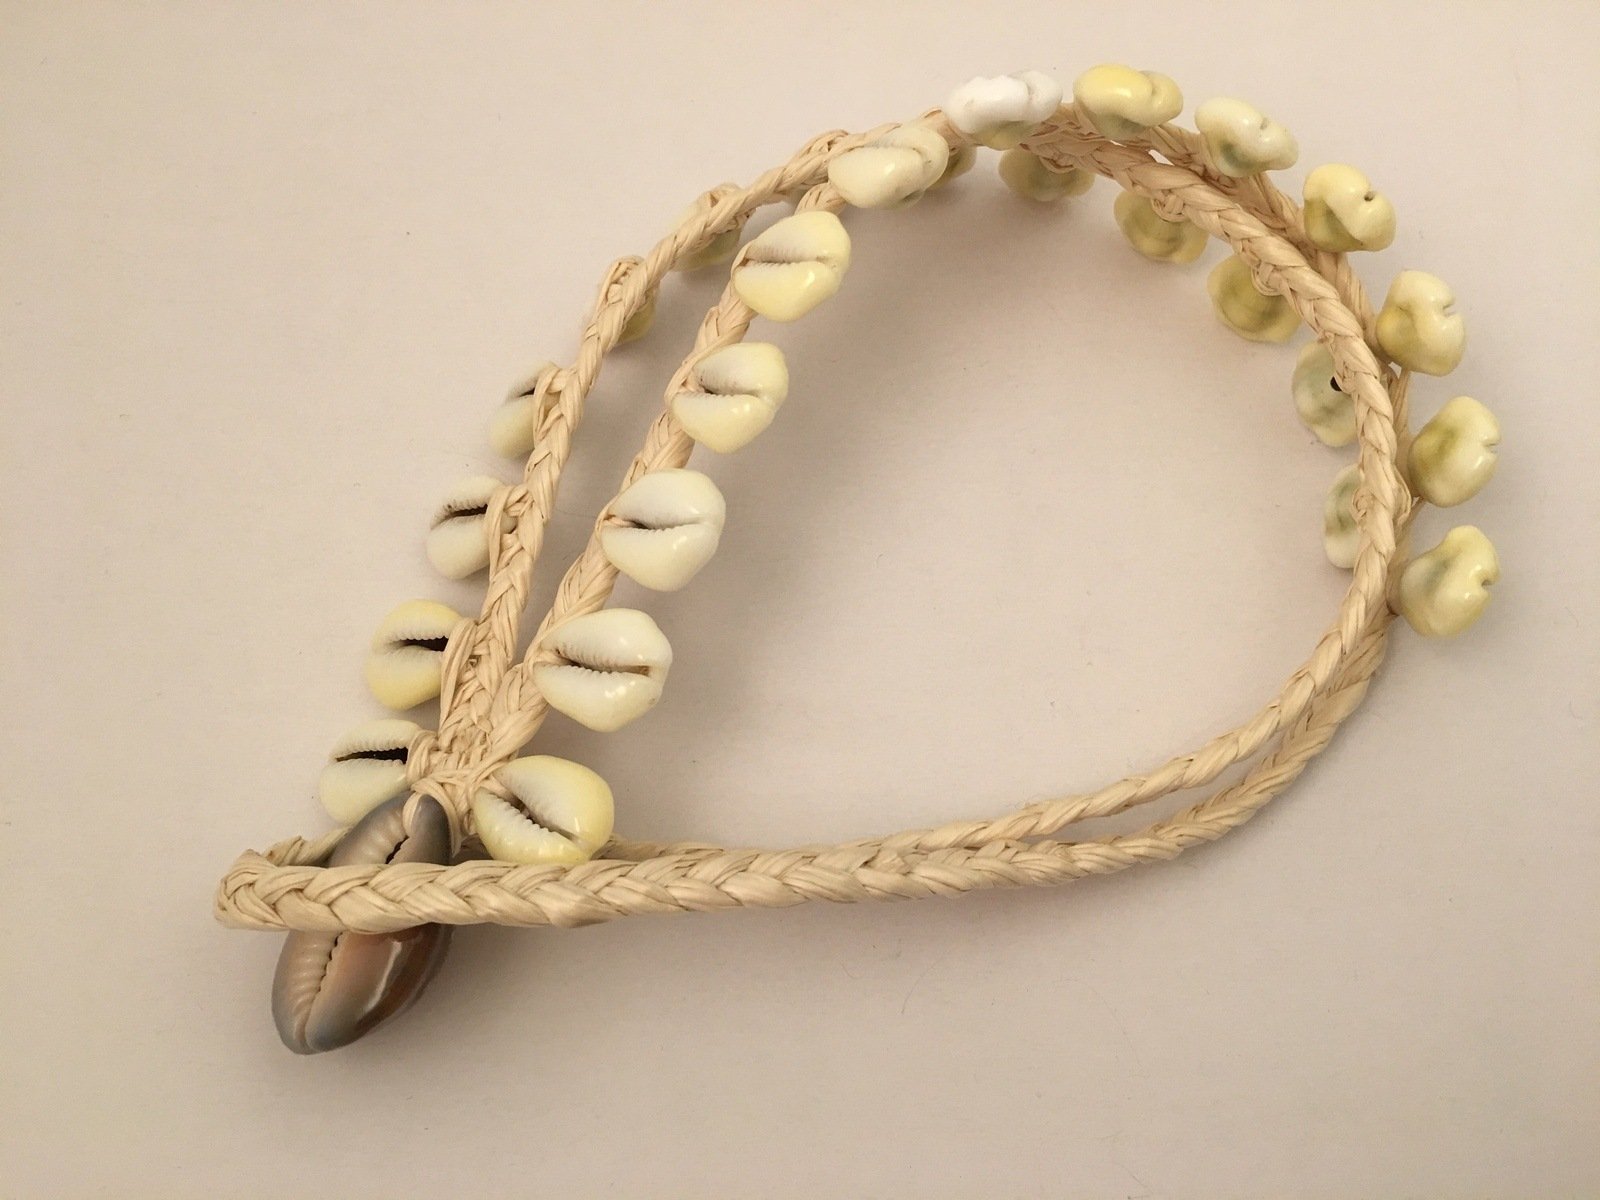 Exotic Cowrie Shells Necklace "Ward off the evil eye" Ethnic Handmade Jewelry